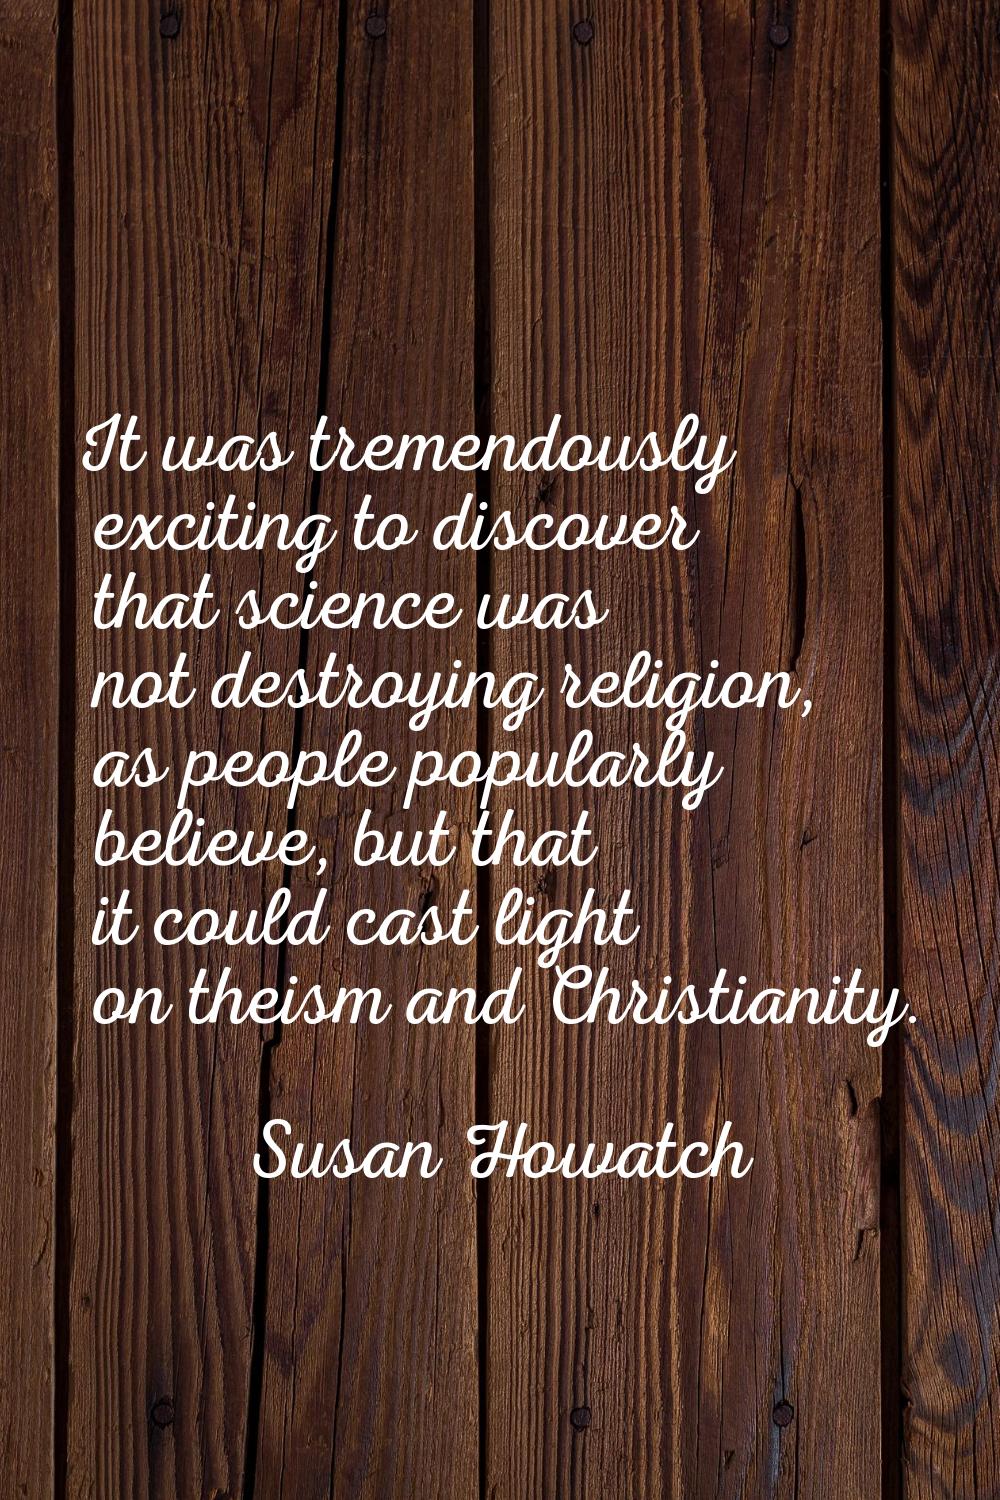 It was tremendously exciting to discover that science was not destroying religion, as people popula